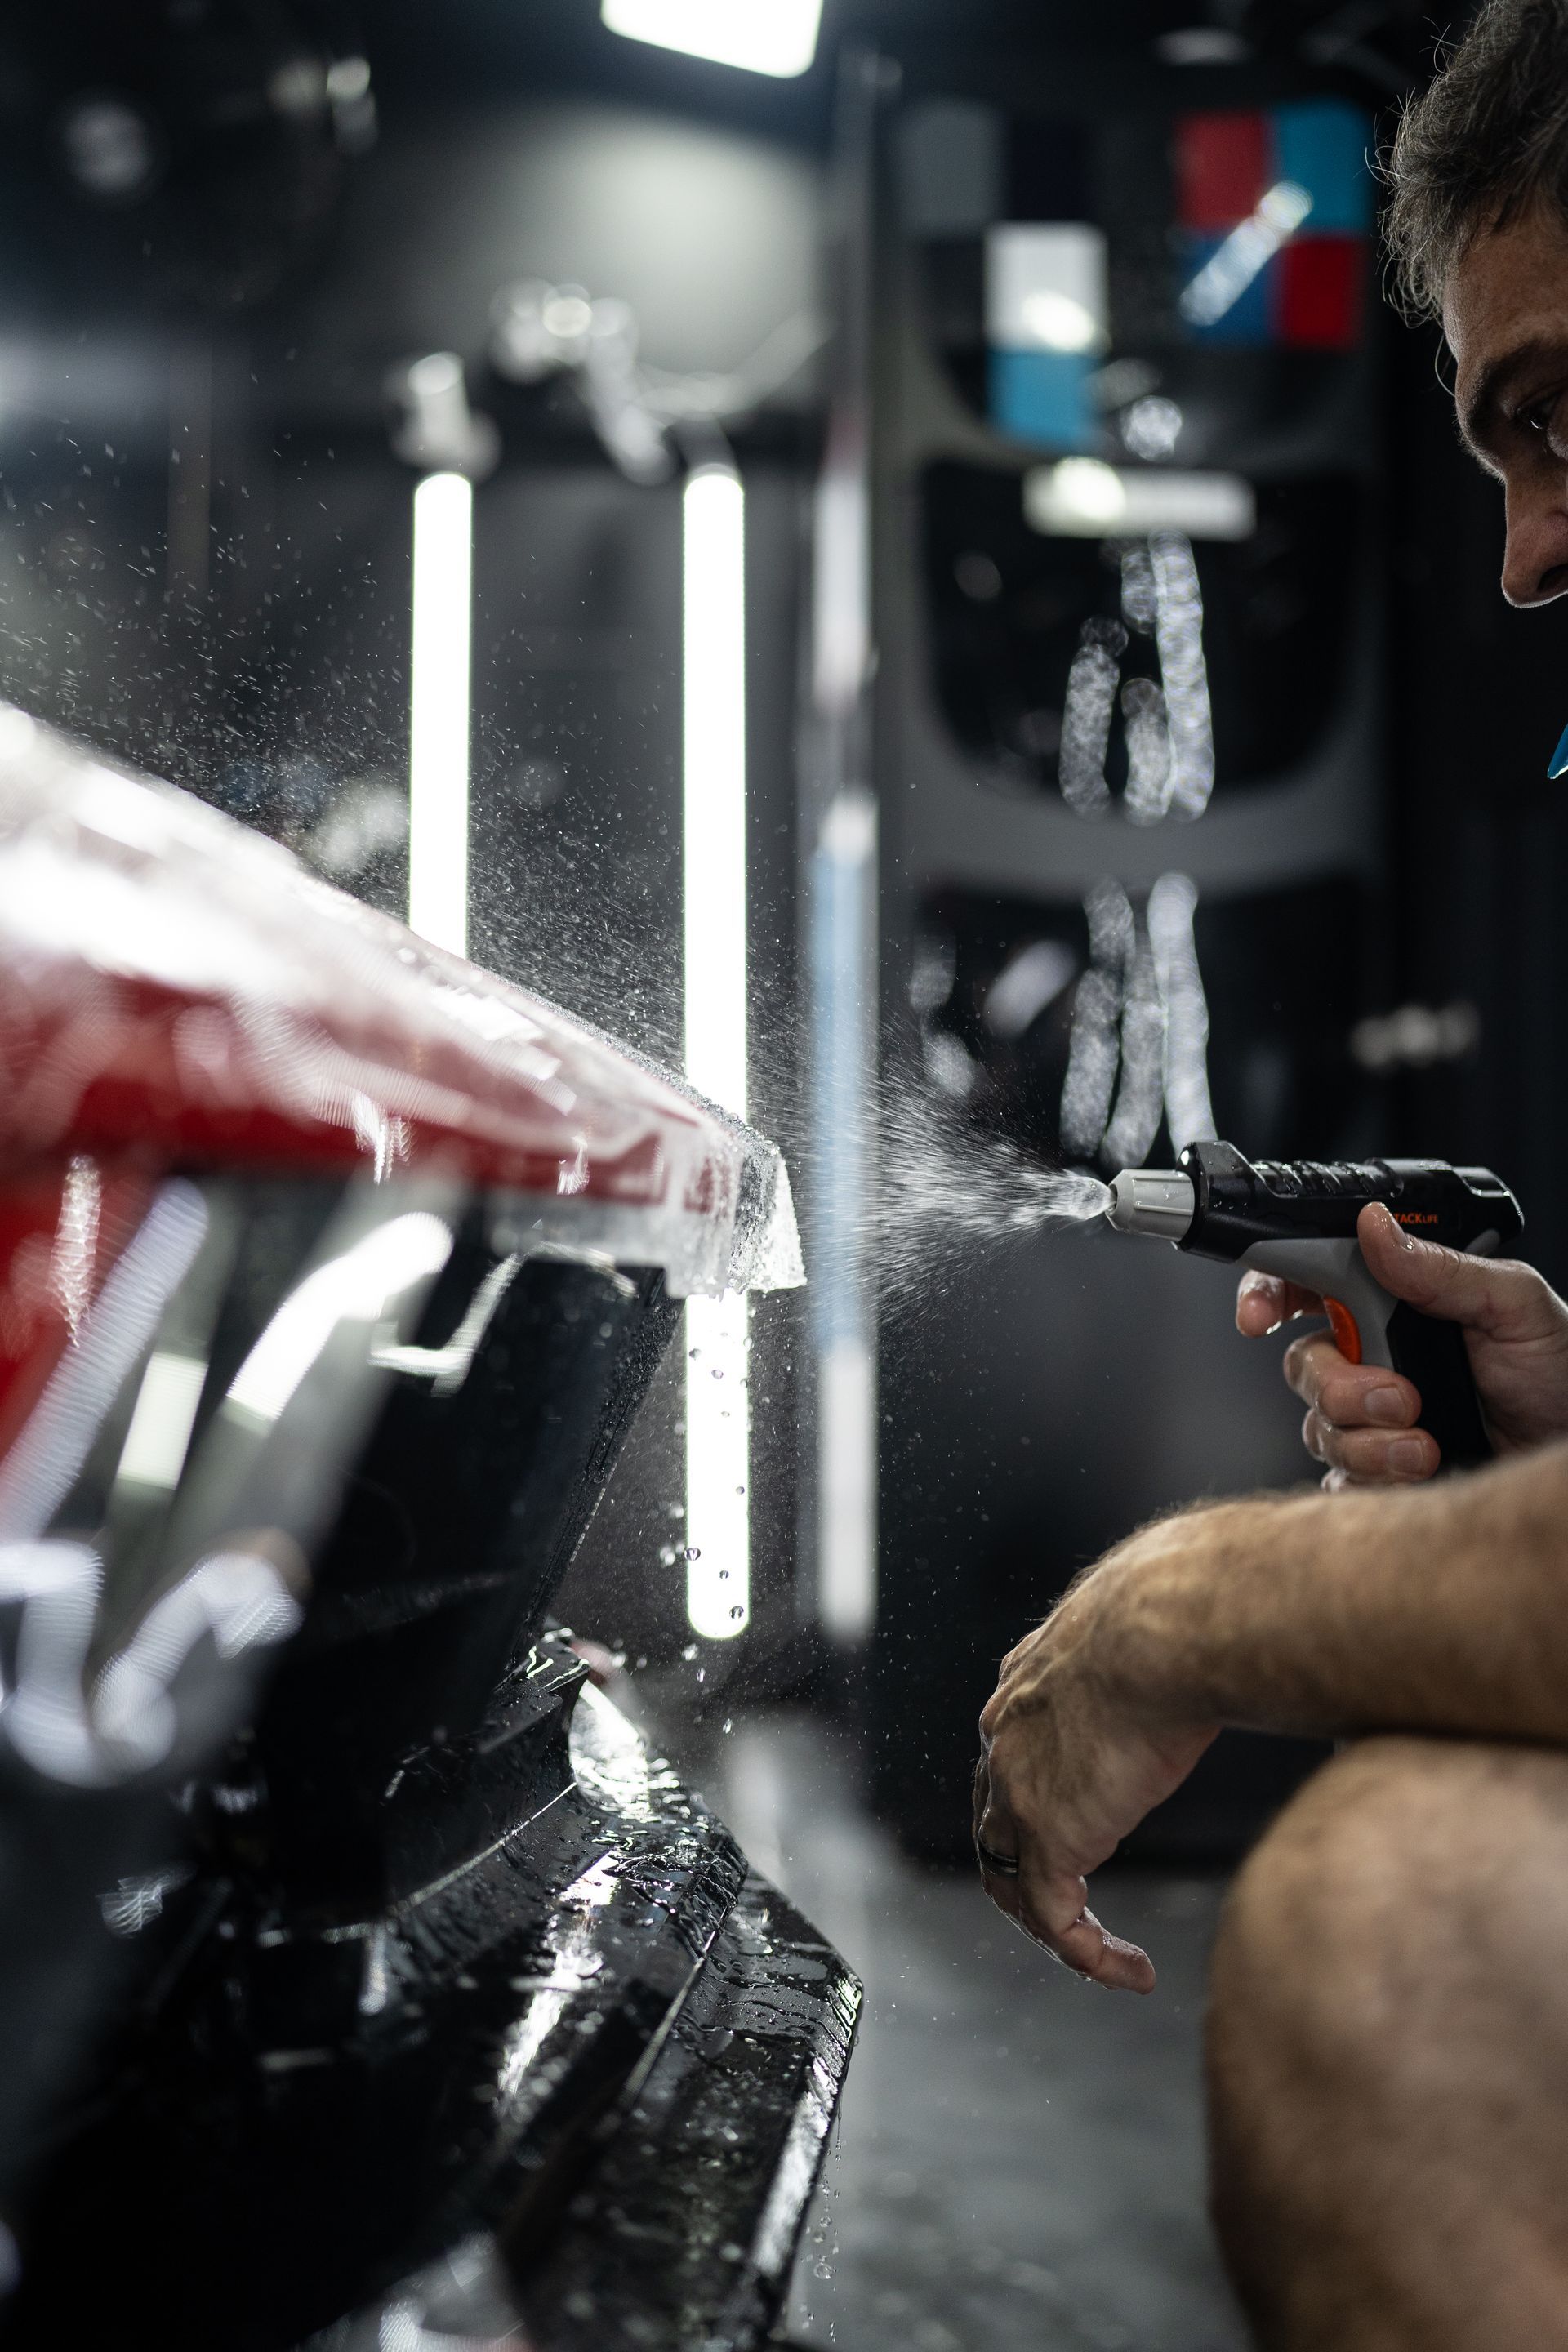 A man is spraying water on a car in a garage.